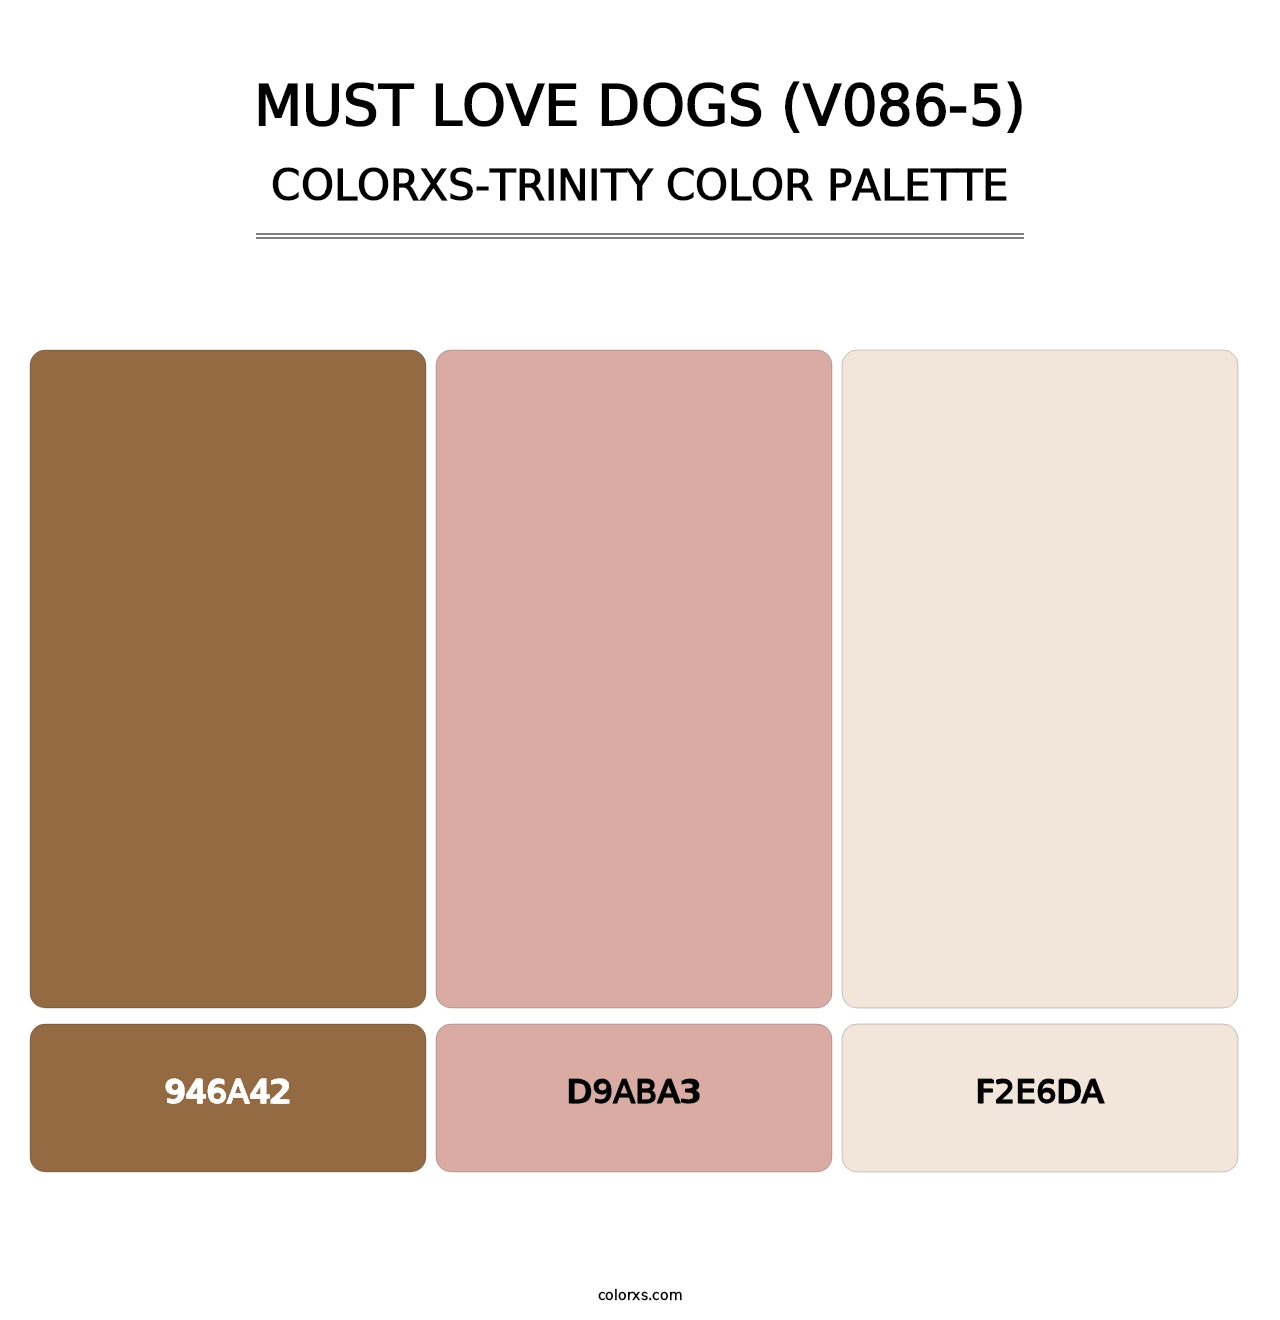 Must Love Dogs (V086-5) - Colorxs Trinity Palette